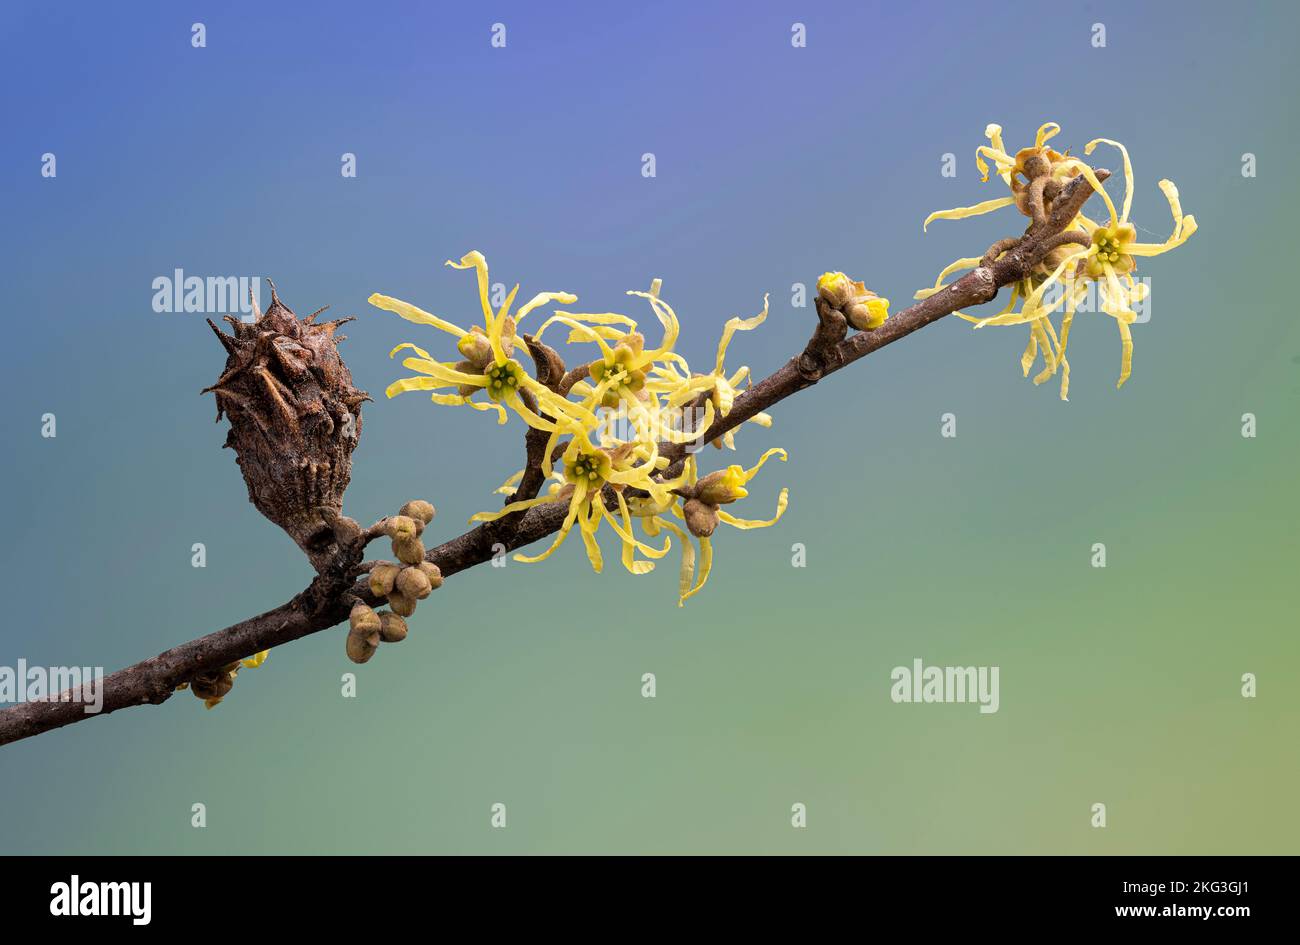 Twig of witch hazel tree in late autumn in Virginia showing blossoms and a gall formed by the witch hazel bud gall aphid. Stock Photo